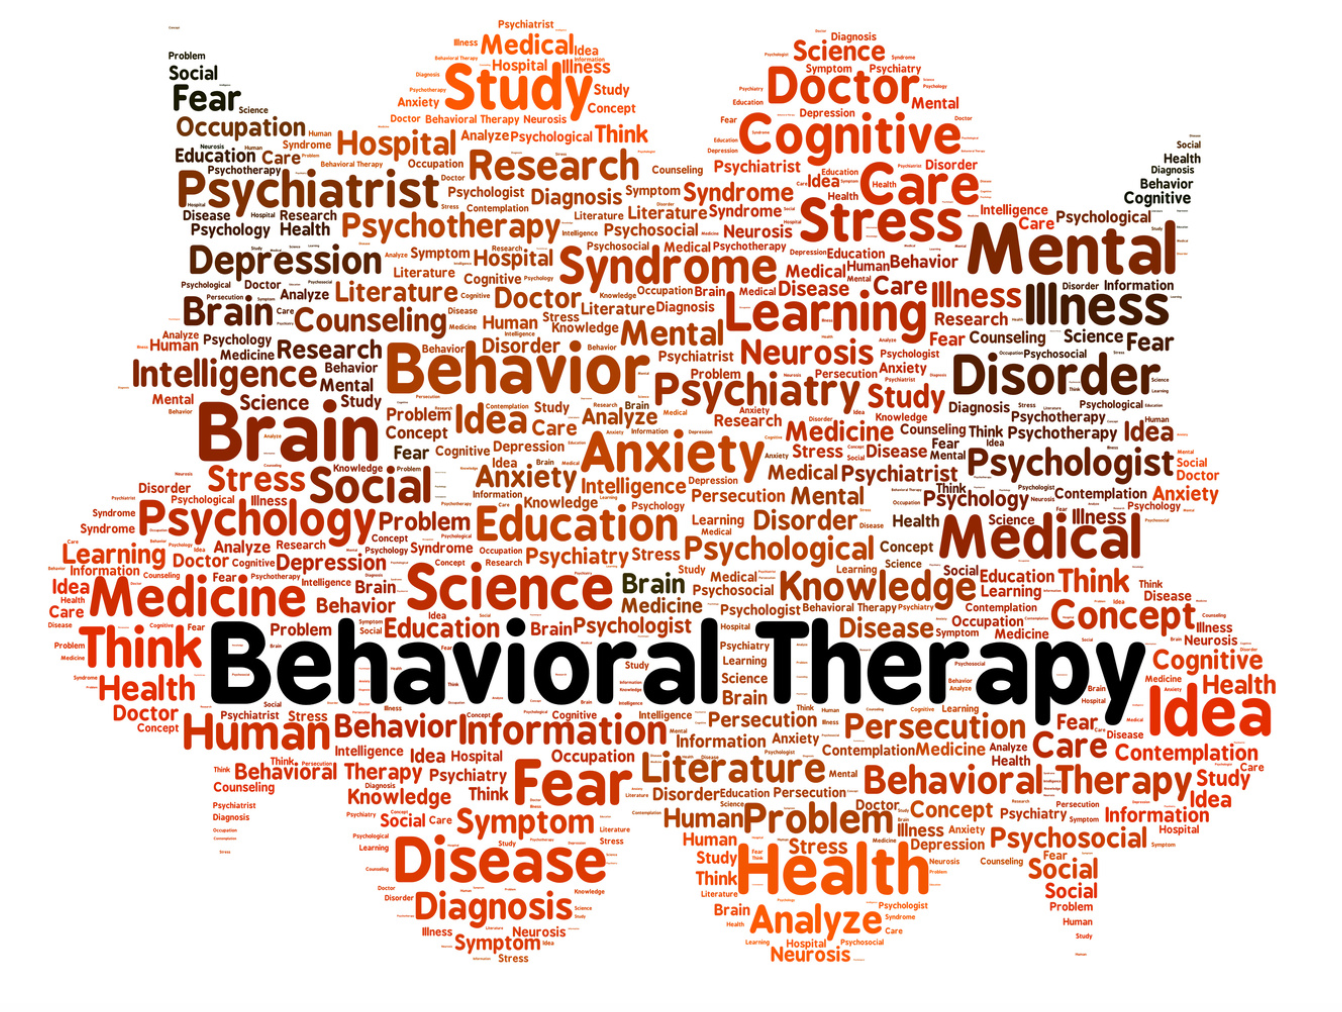 Outpatient Behavioral Health Treatment Associated With Reduced Medical and Pharmacy Spending